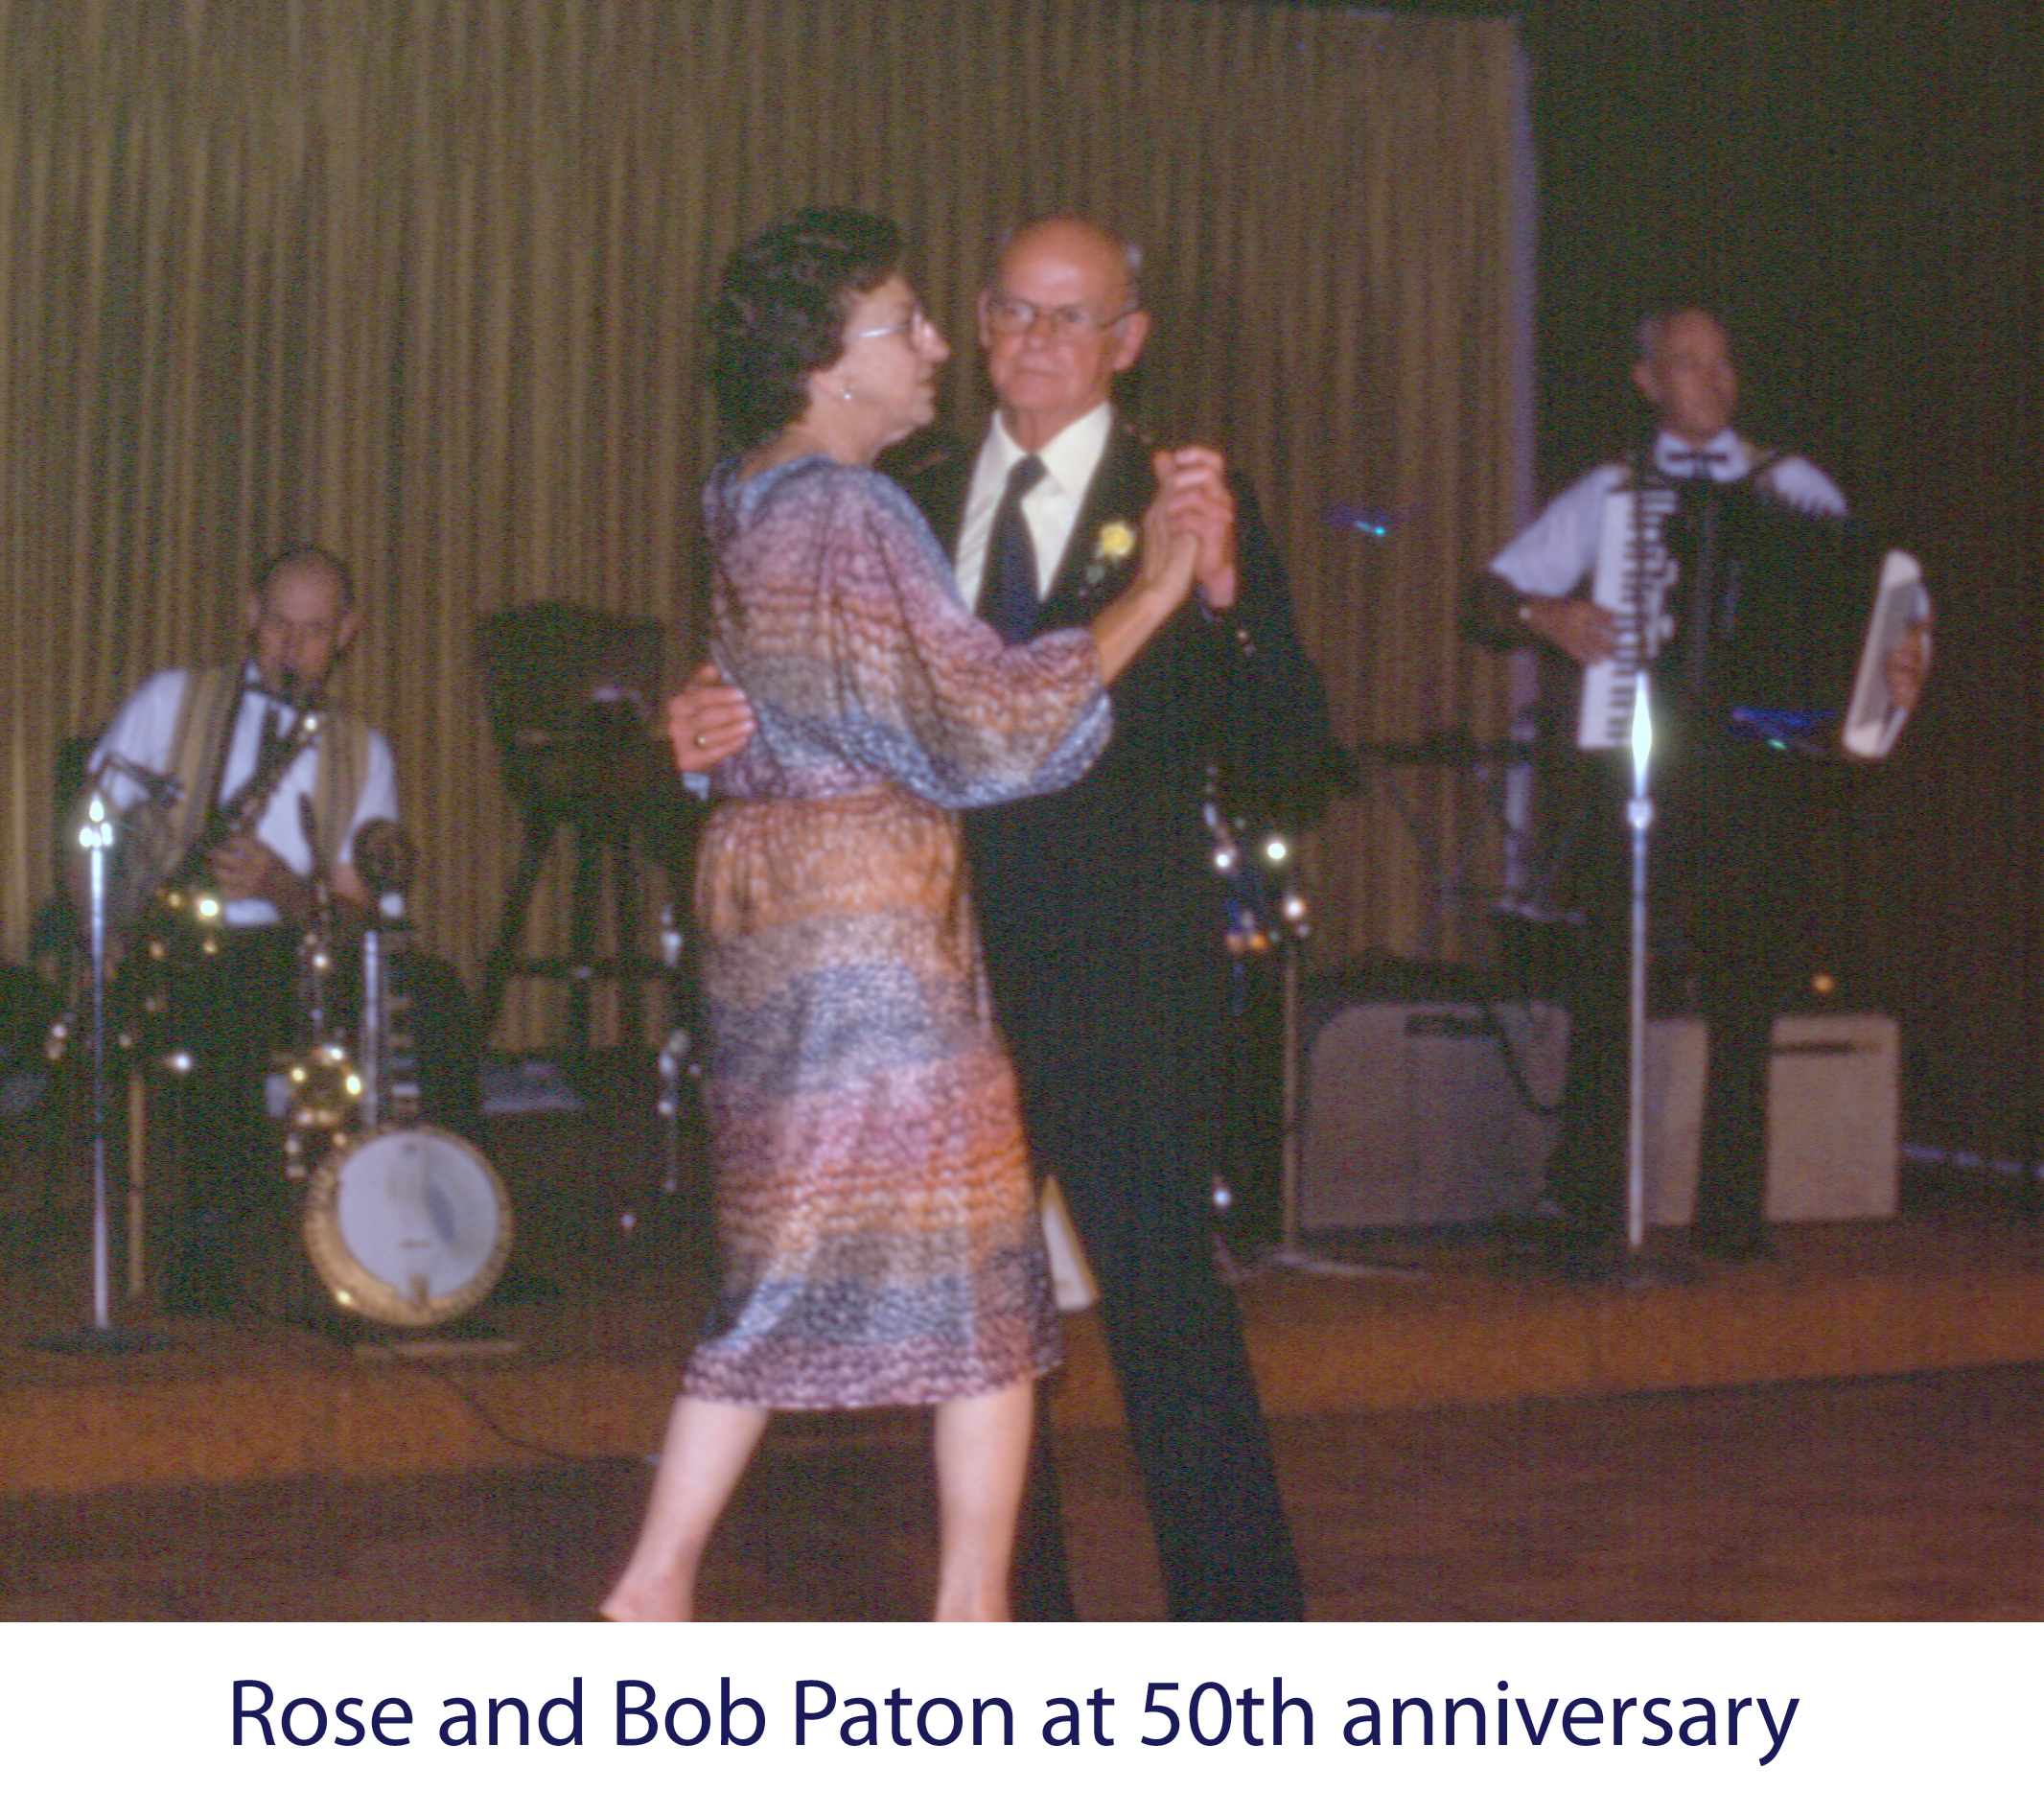 Bob and Rose Paton dancing at their 50th anniversary celebration